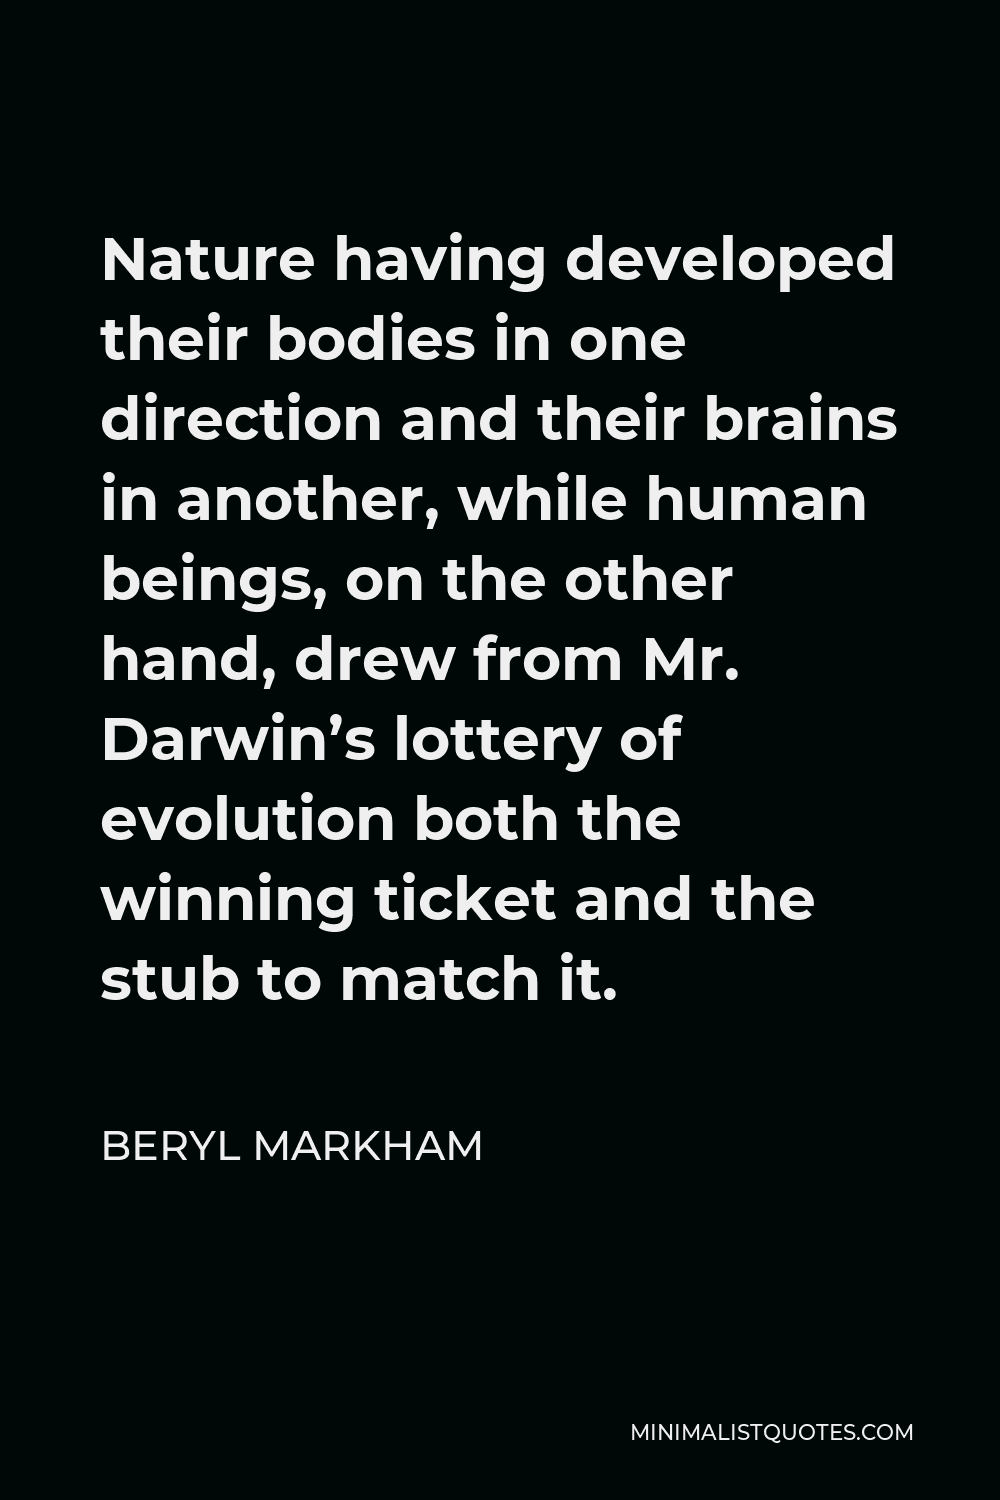 Beryl Markham Quote - Nature having developed their bodies in one direction and their brains in another, while human beings, on the other hand, drew from Mr. Darwin’s lottery of evolution both the winning ticket and the stub to match it.